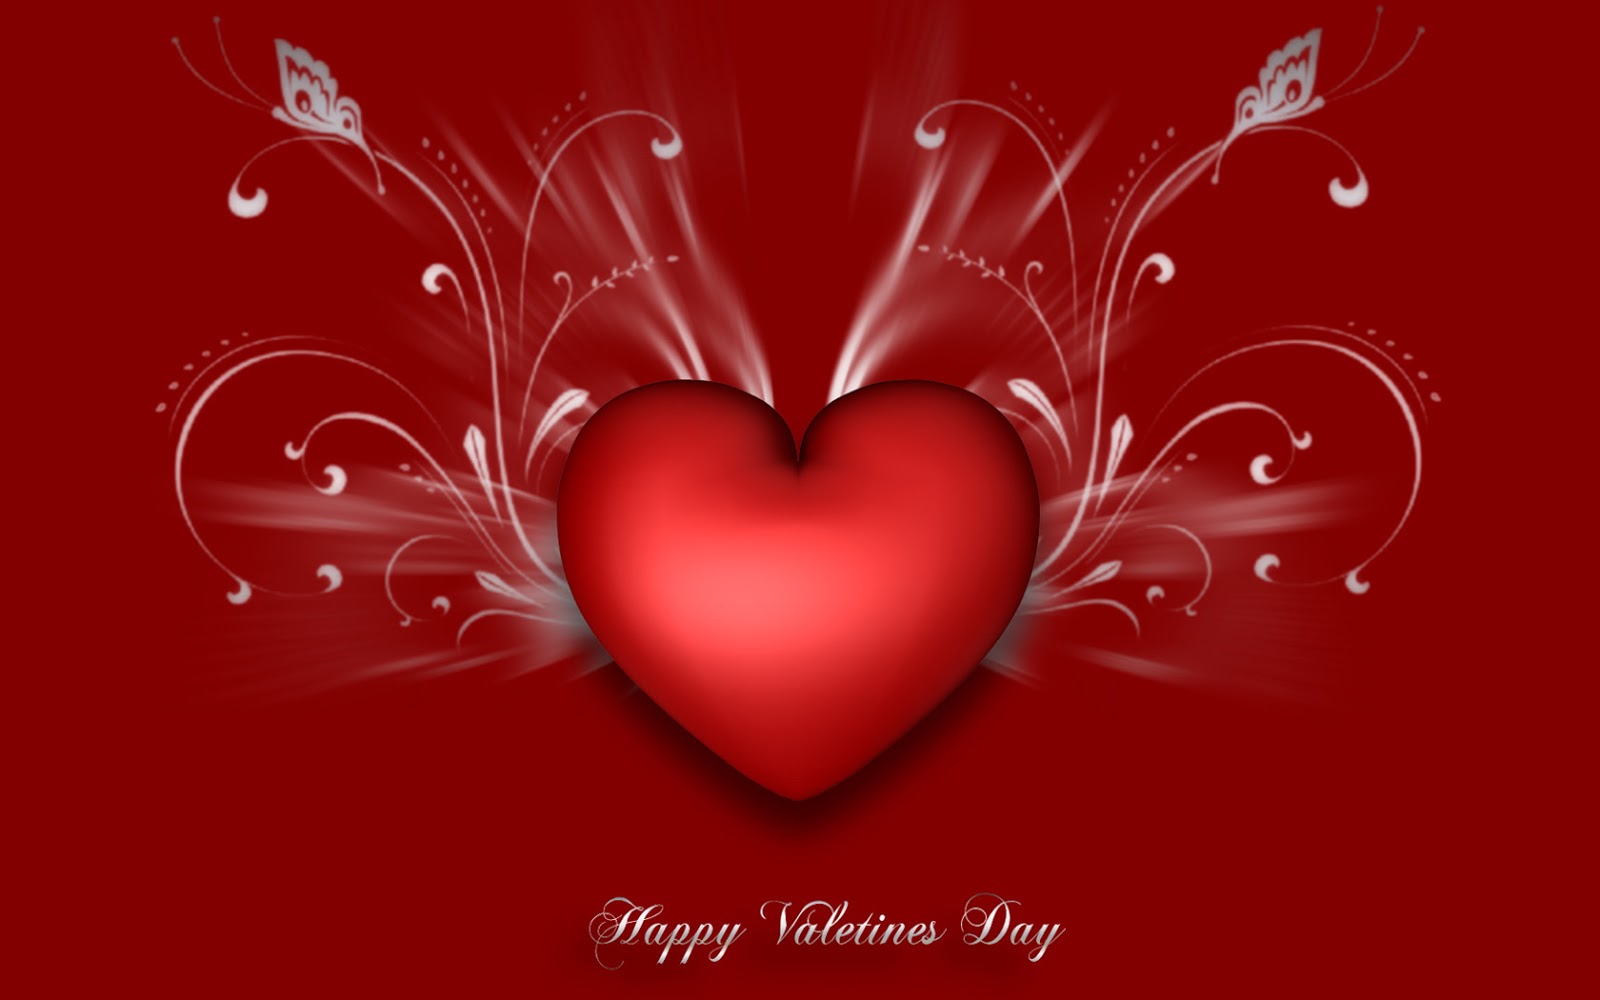 Valentine S Day Funny Wallpaper Pictures Image Online